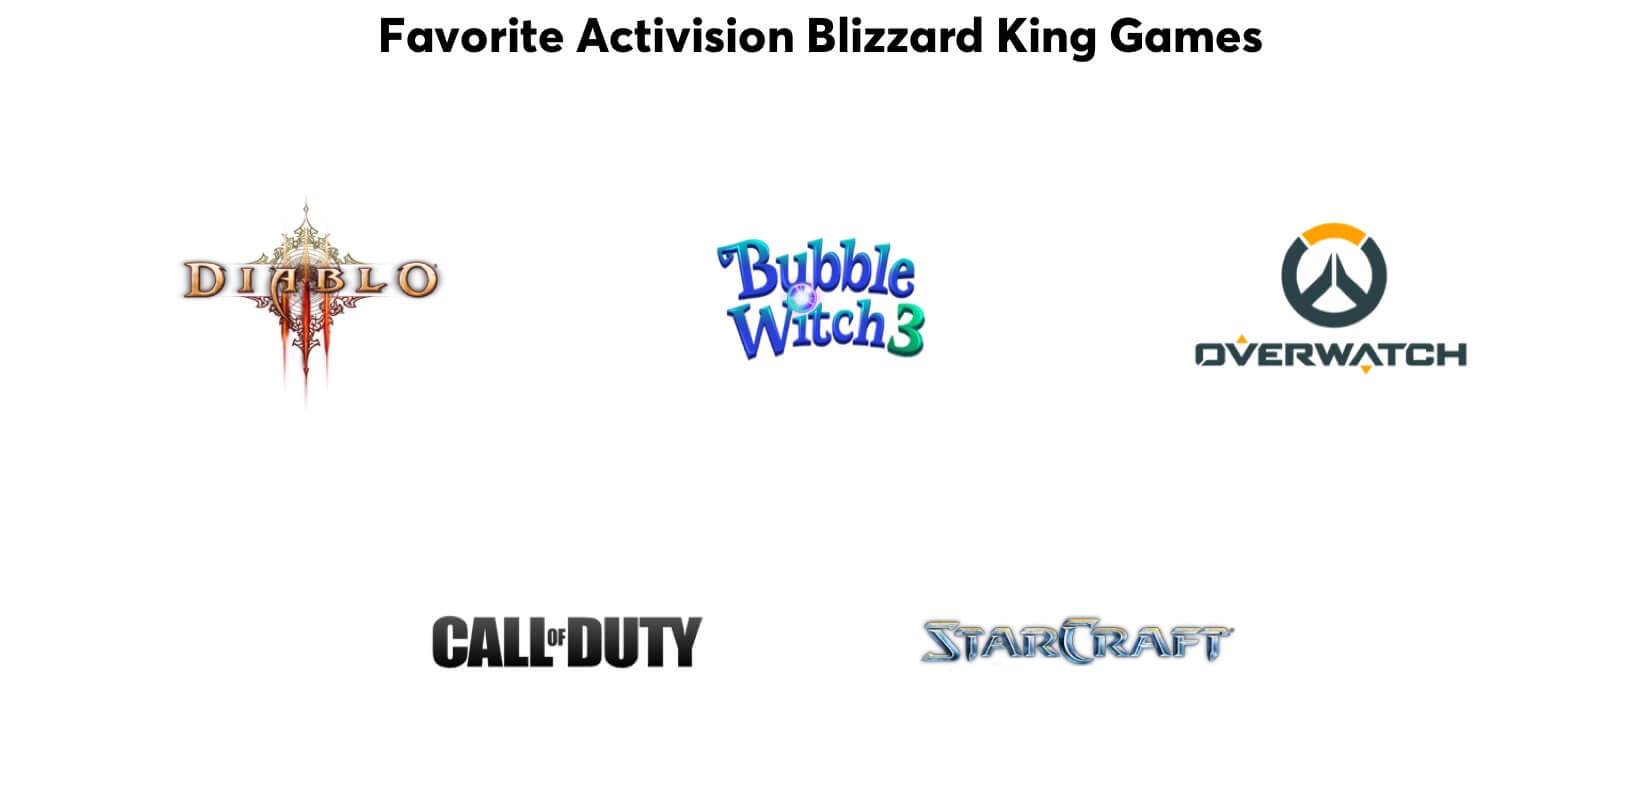 Lifestylists Favorite Games: Diablo, Bubble Witch, Overwatch, Call of Duty, and StarCraft